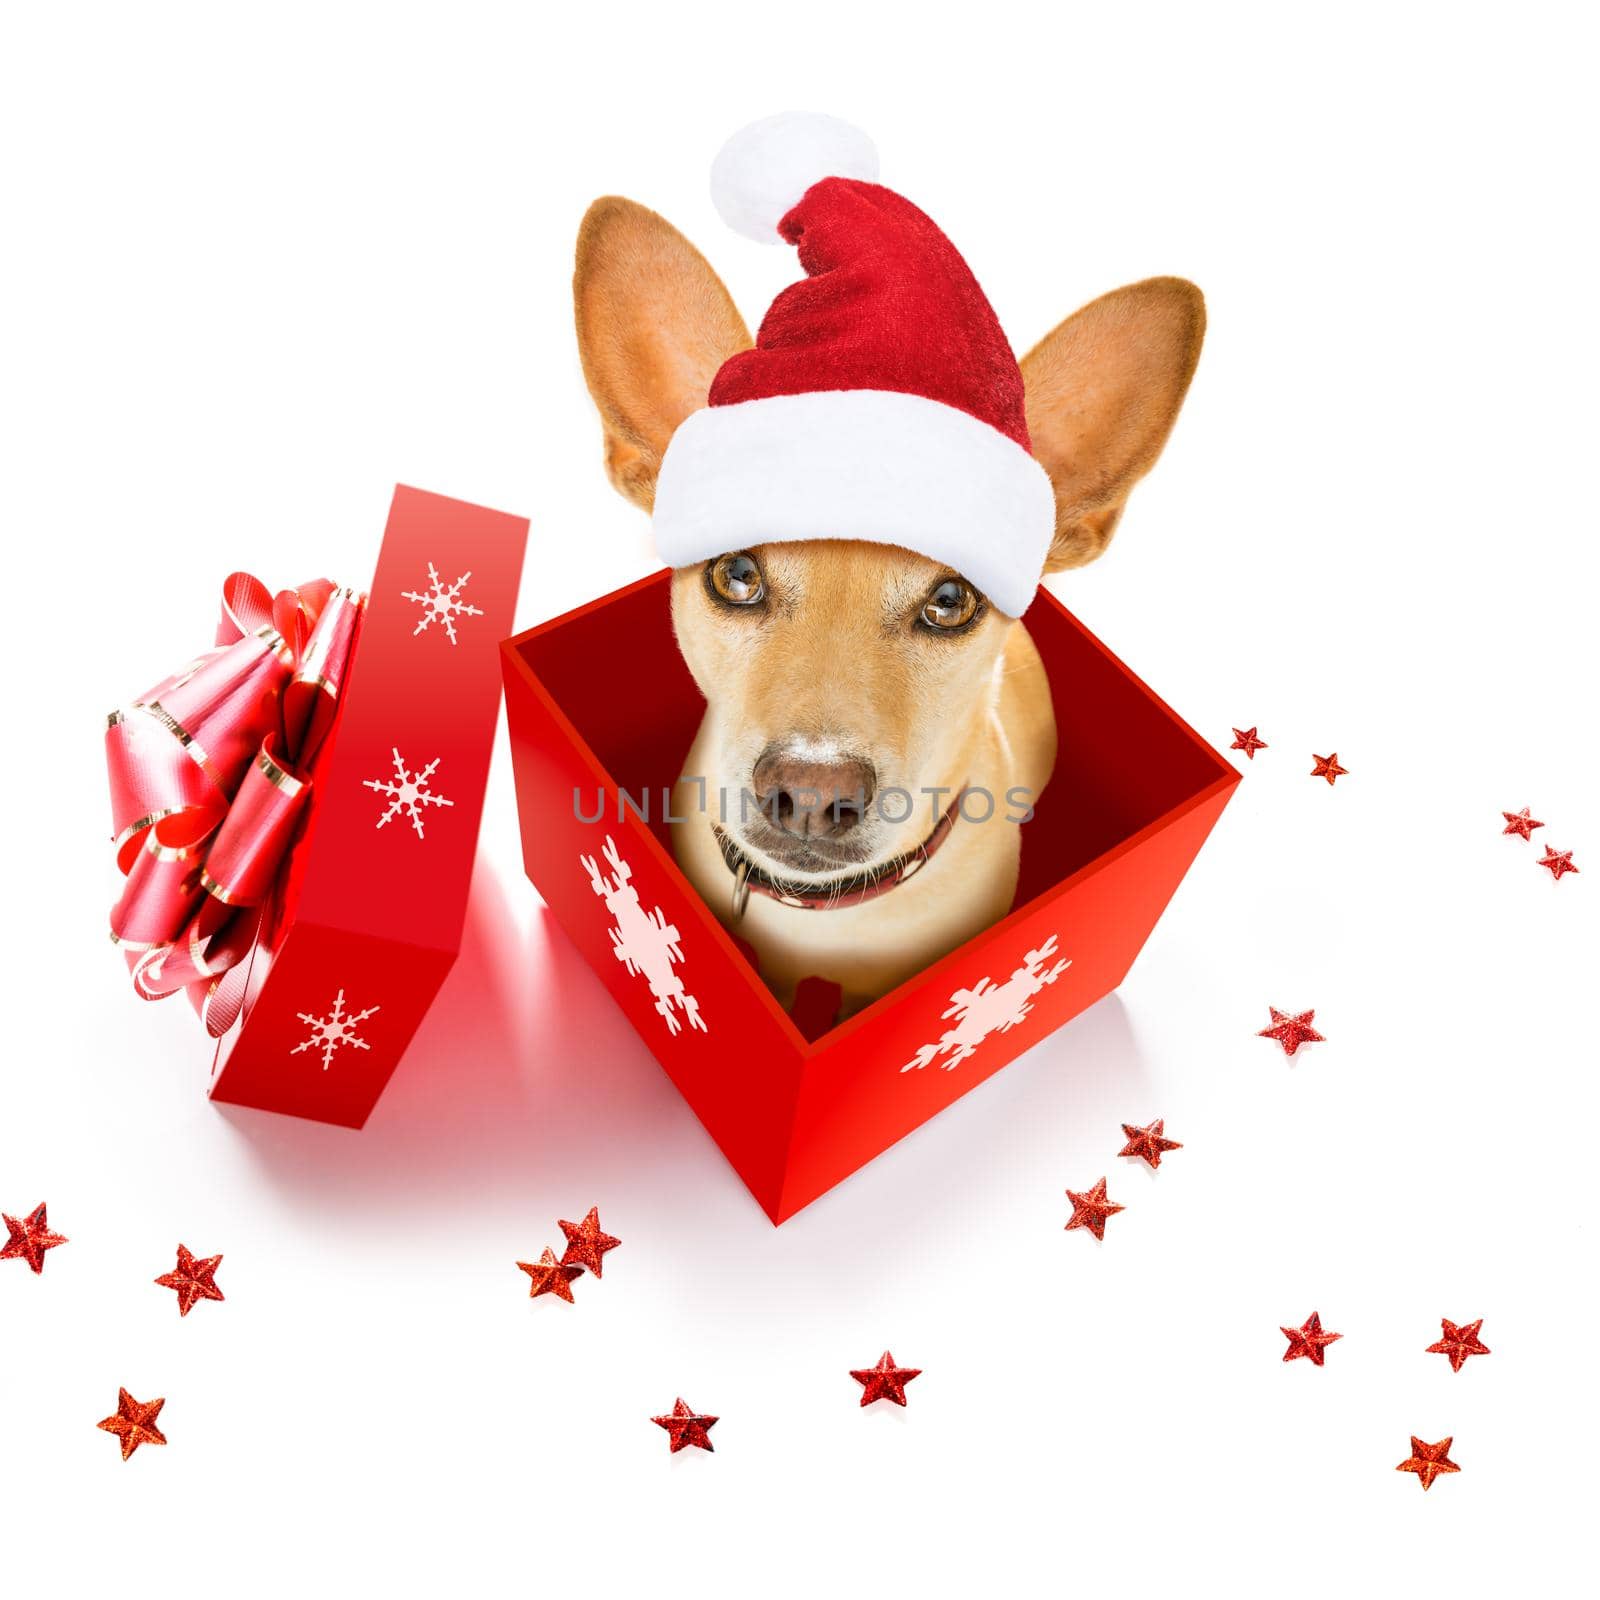 christmas santa claus chihuahua dog as a holiday season surprise out of a gift or present box  with red hat , isolated on white background with stars falling